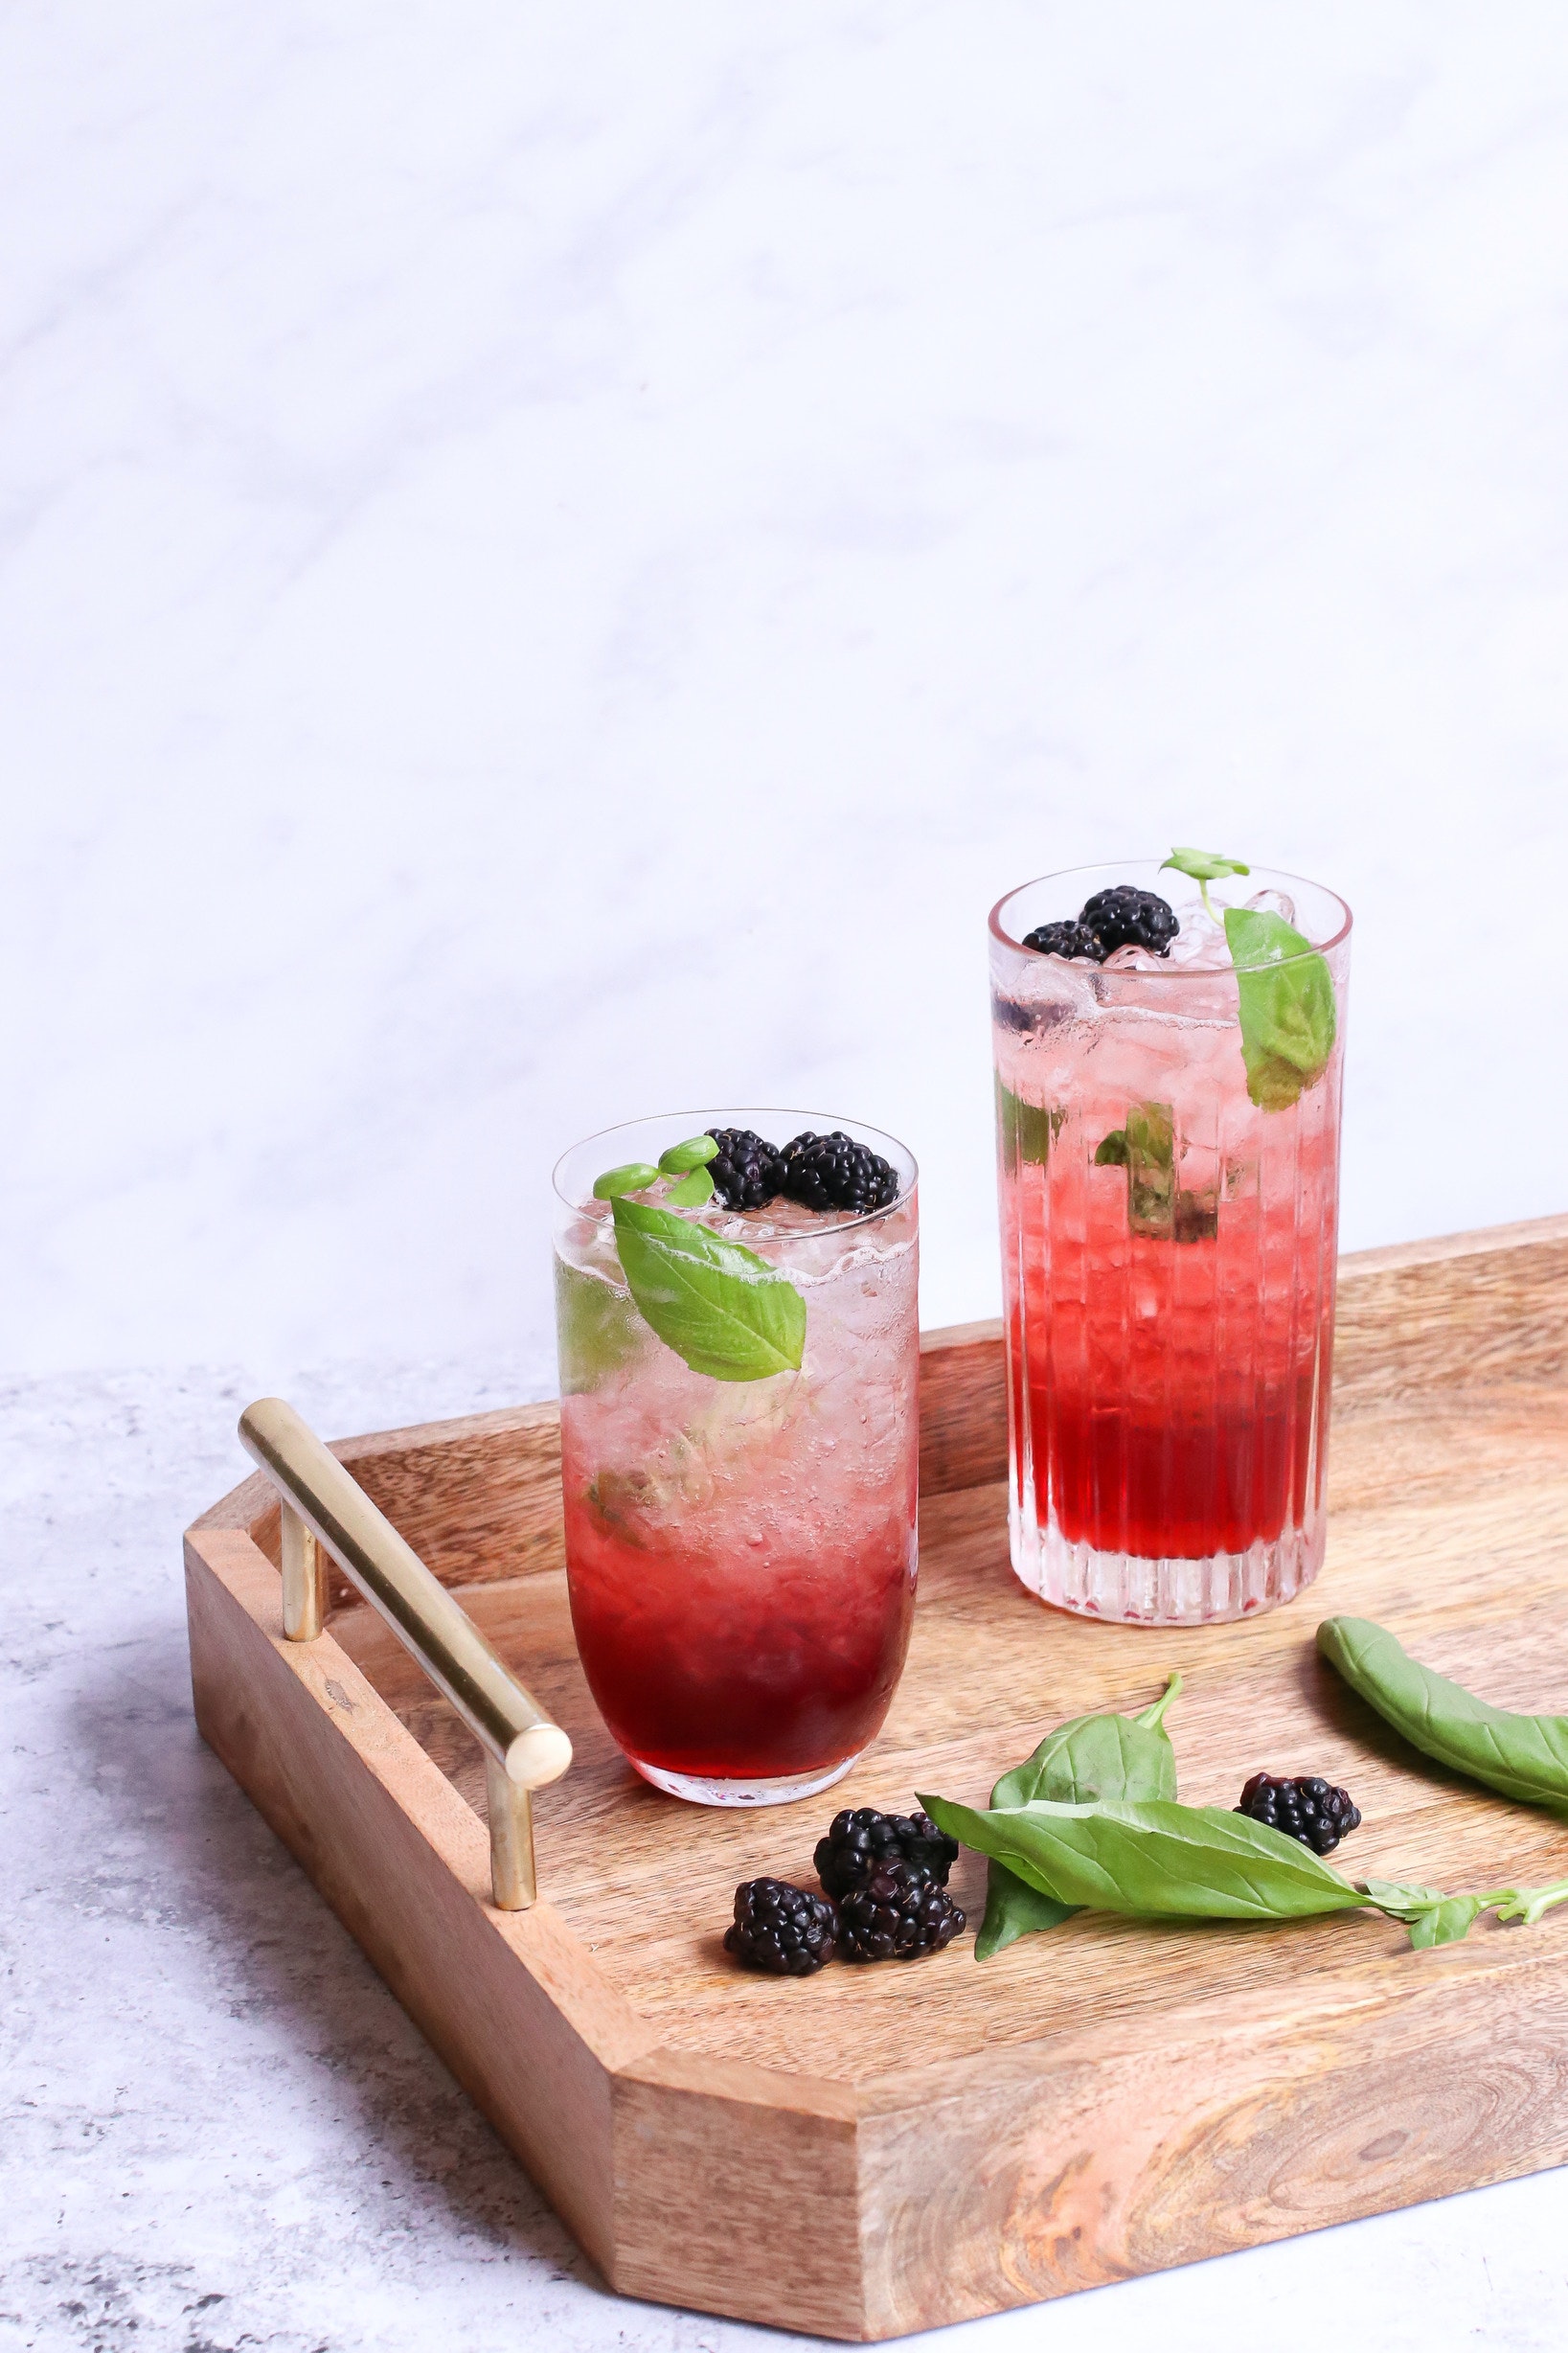 two glasses of red liquid topped with berries and garnishes sit on a fancy wooden tray